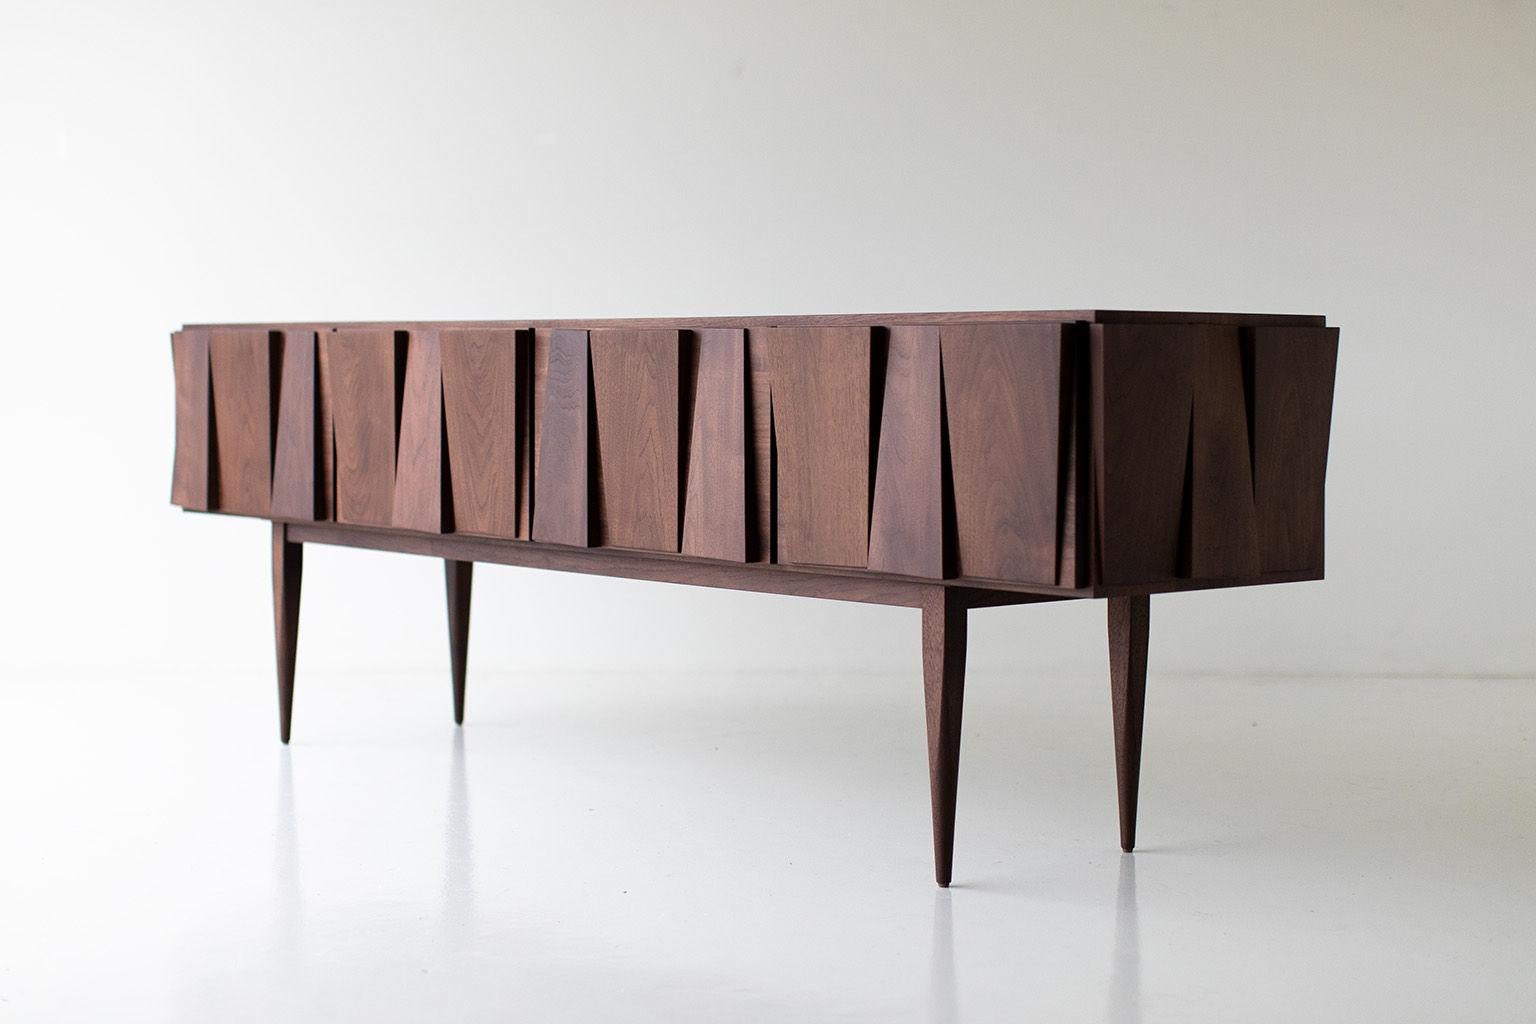 CraftAssociates console, modern console table, walnut, Cambre Collection

Craft Associates® Furniture is expertly crafted. The credenza is constructed from solid hardwood by hand, not machine. The walnut is then shaped by artisans and finished